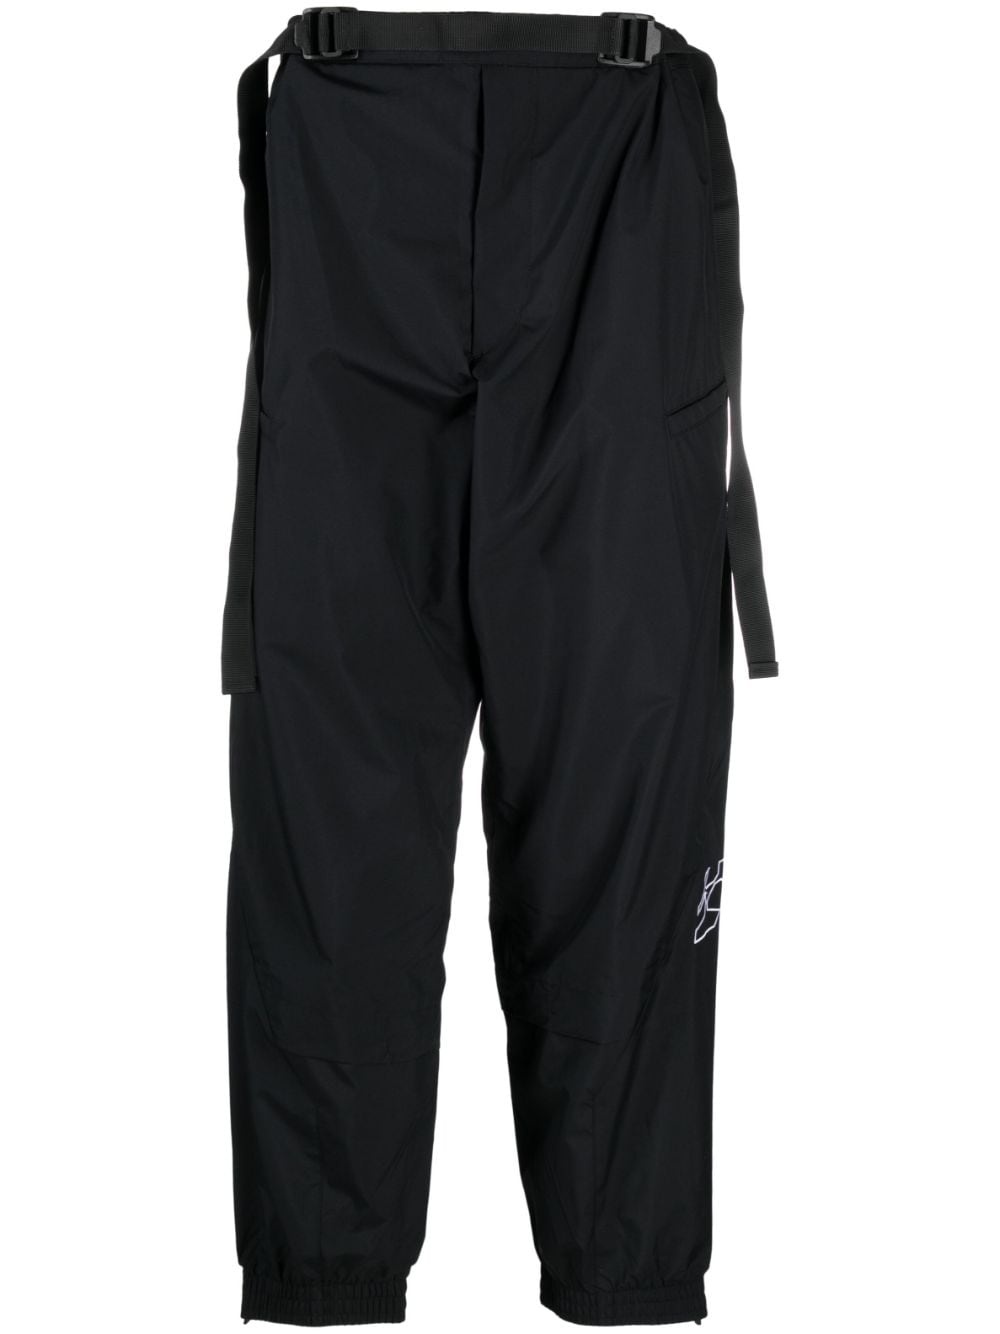 P53 Gore-Tex tapered drop-crotch trousers - 1